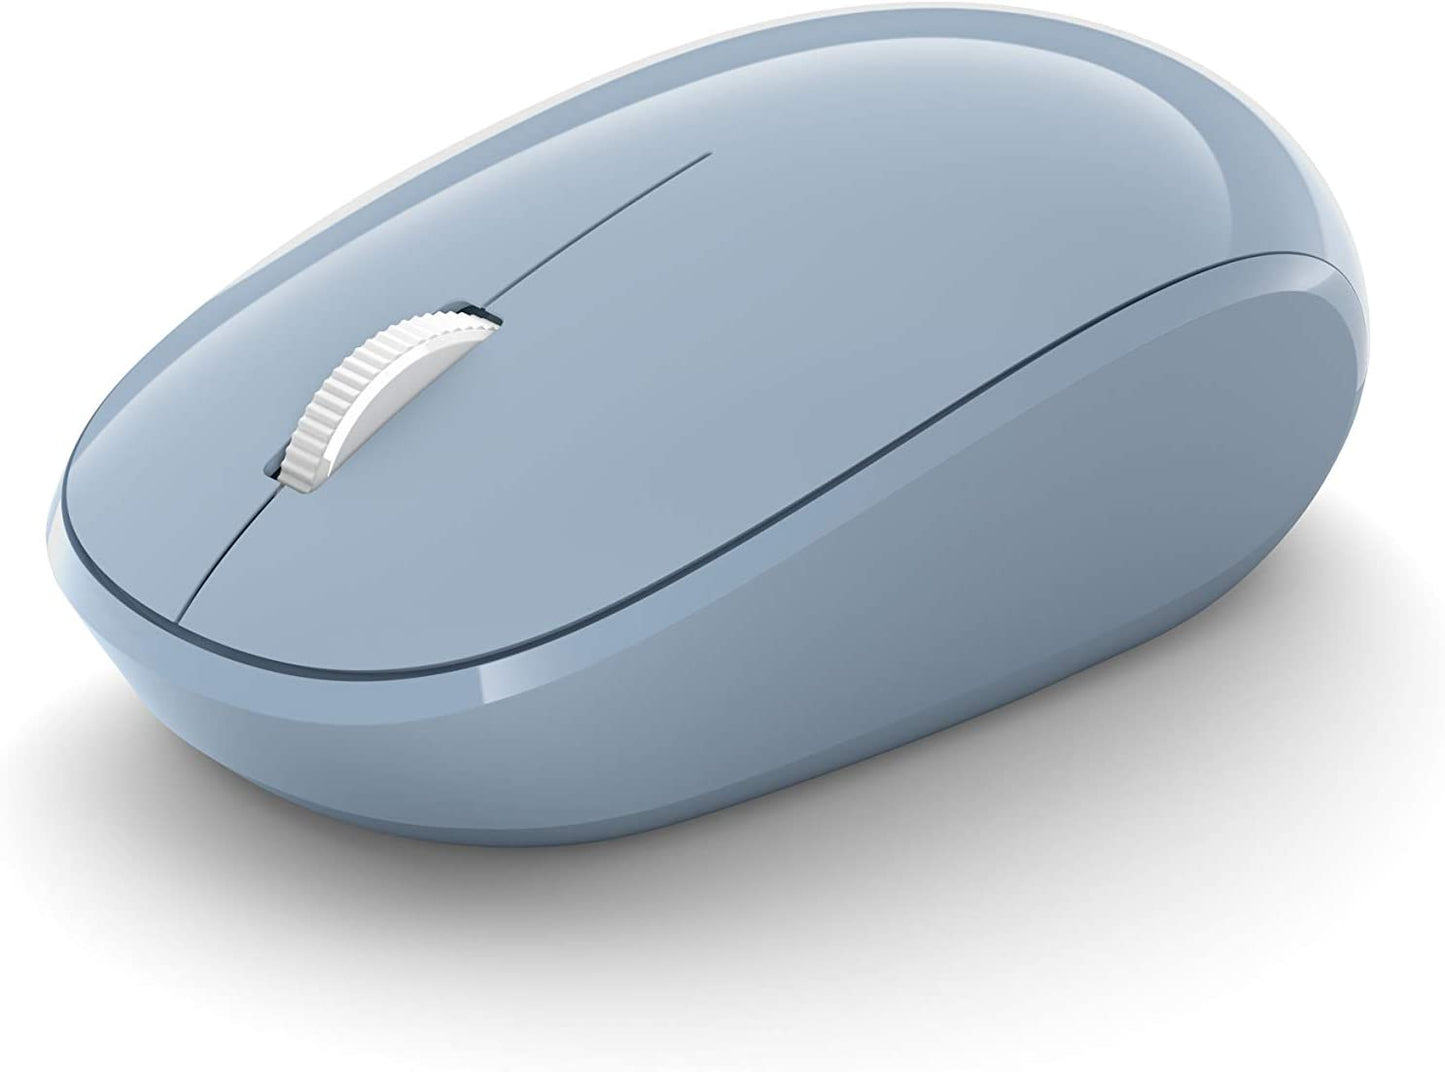 Microsoft Bluetooth Mouse - Pastel Blue. Comfortable design, Right/Left Hand Use, 4-Way Scroll Wheel, Wireless Bluetooth Mouse for PC/Laptop/Desktop, works with for Mac/Windows Computers